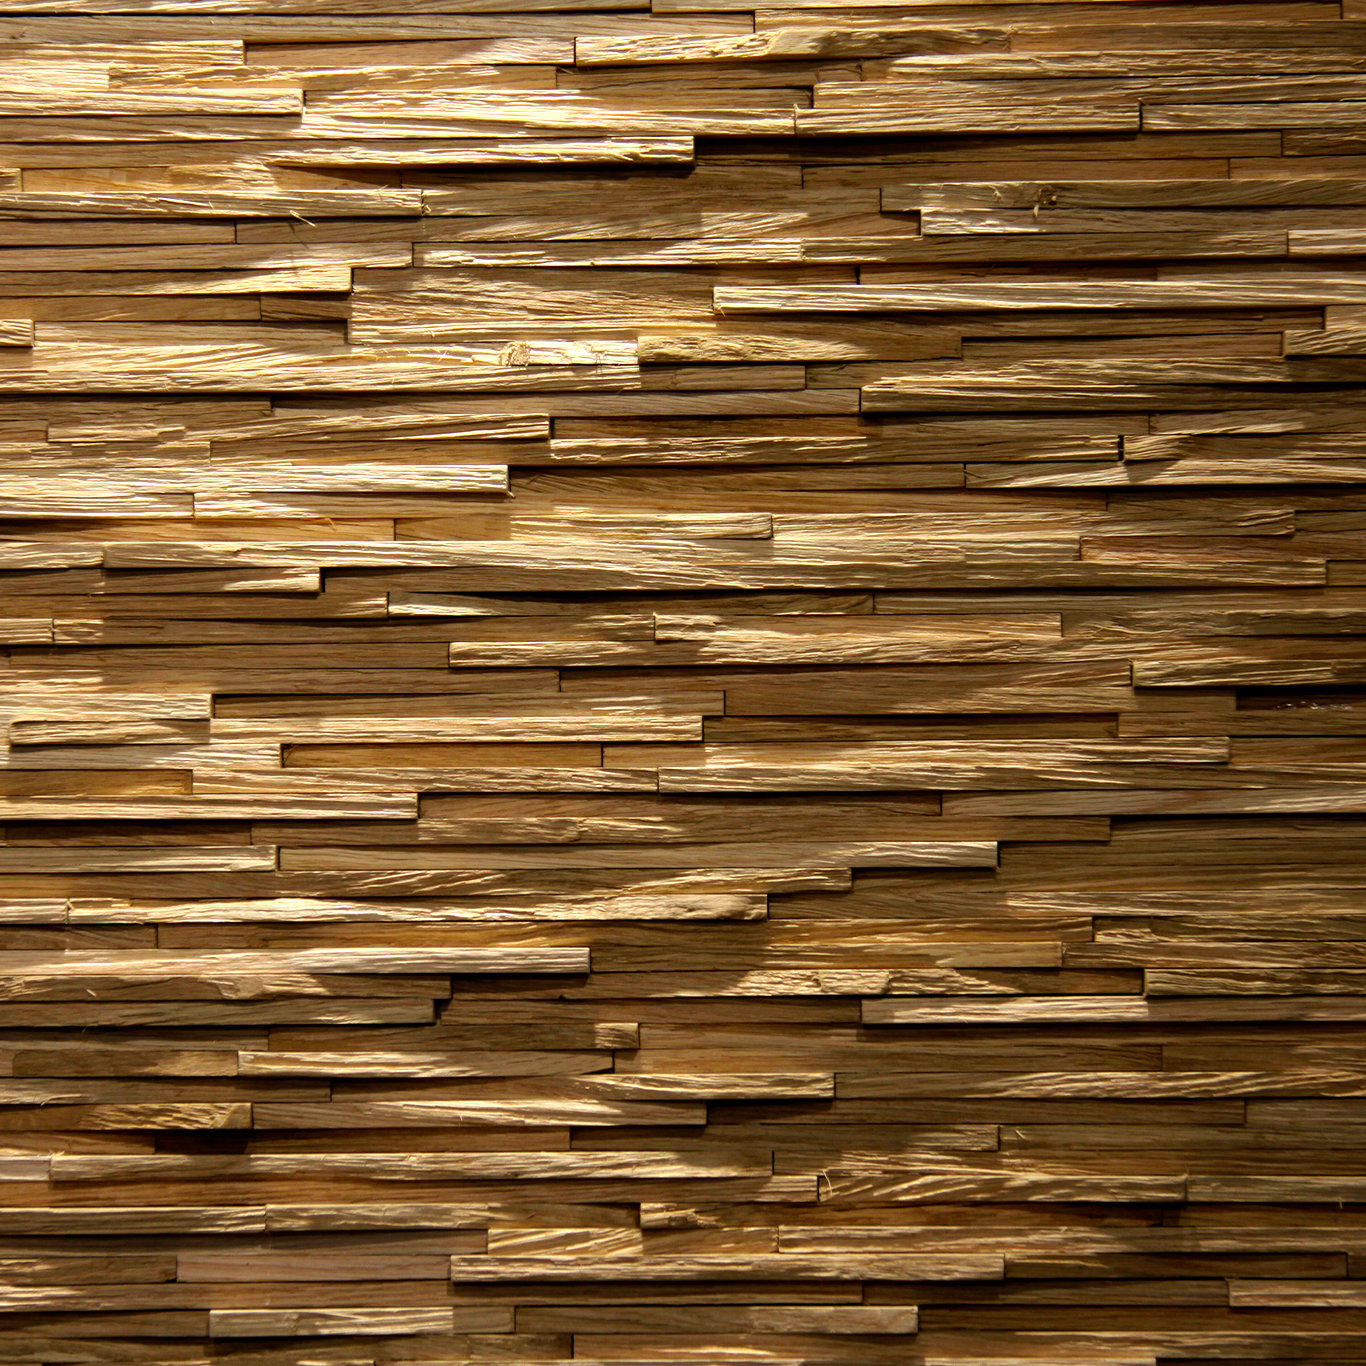 An accent wall made from natural raw wood, mixing simple strips.